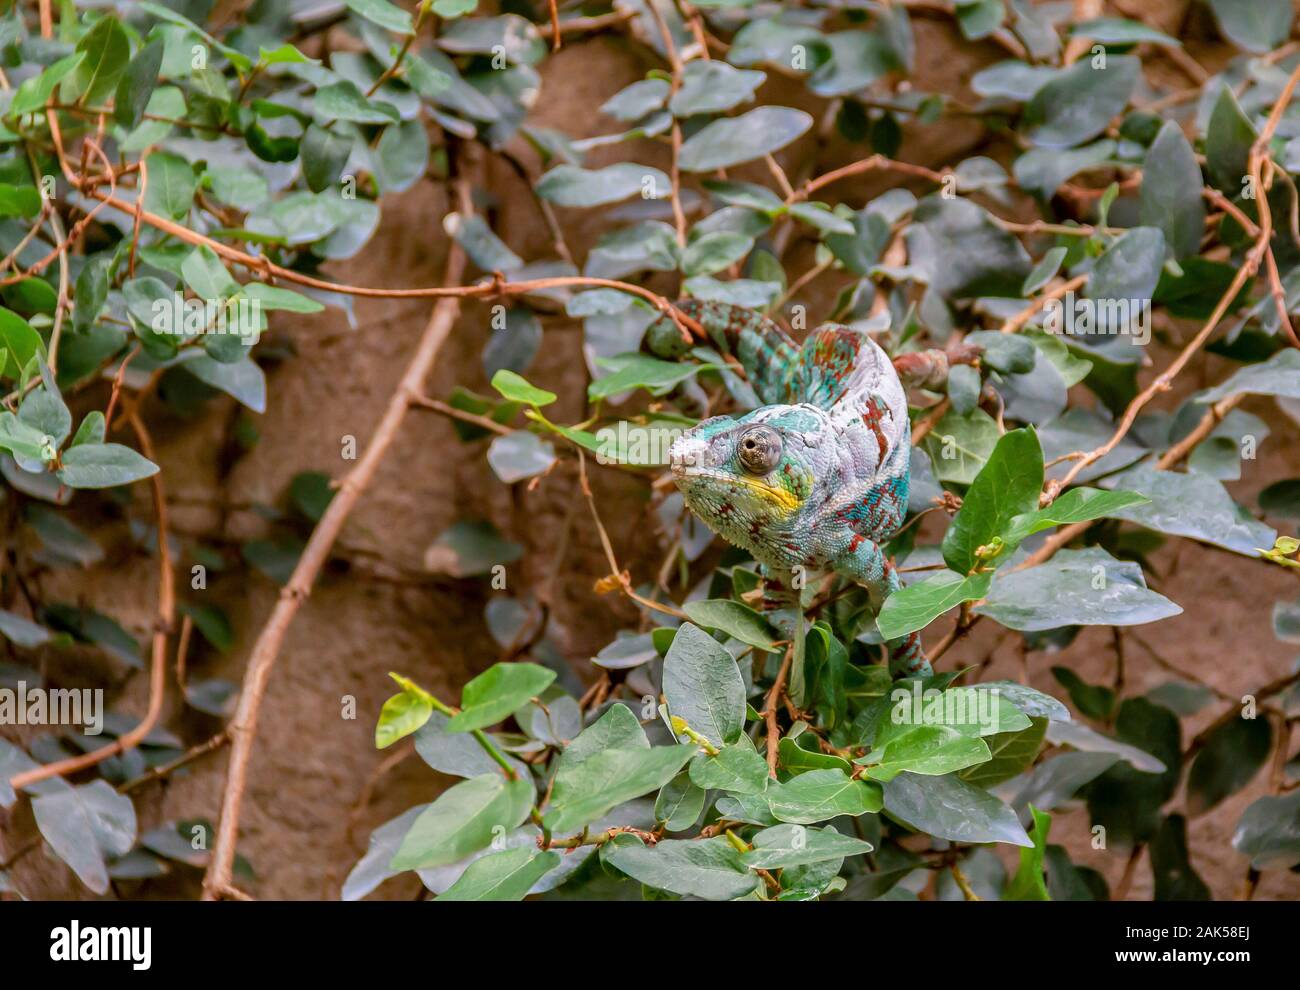 a Panther chameleon while moulting in natural leavy ambiance Stock Photo